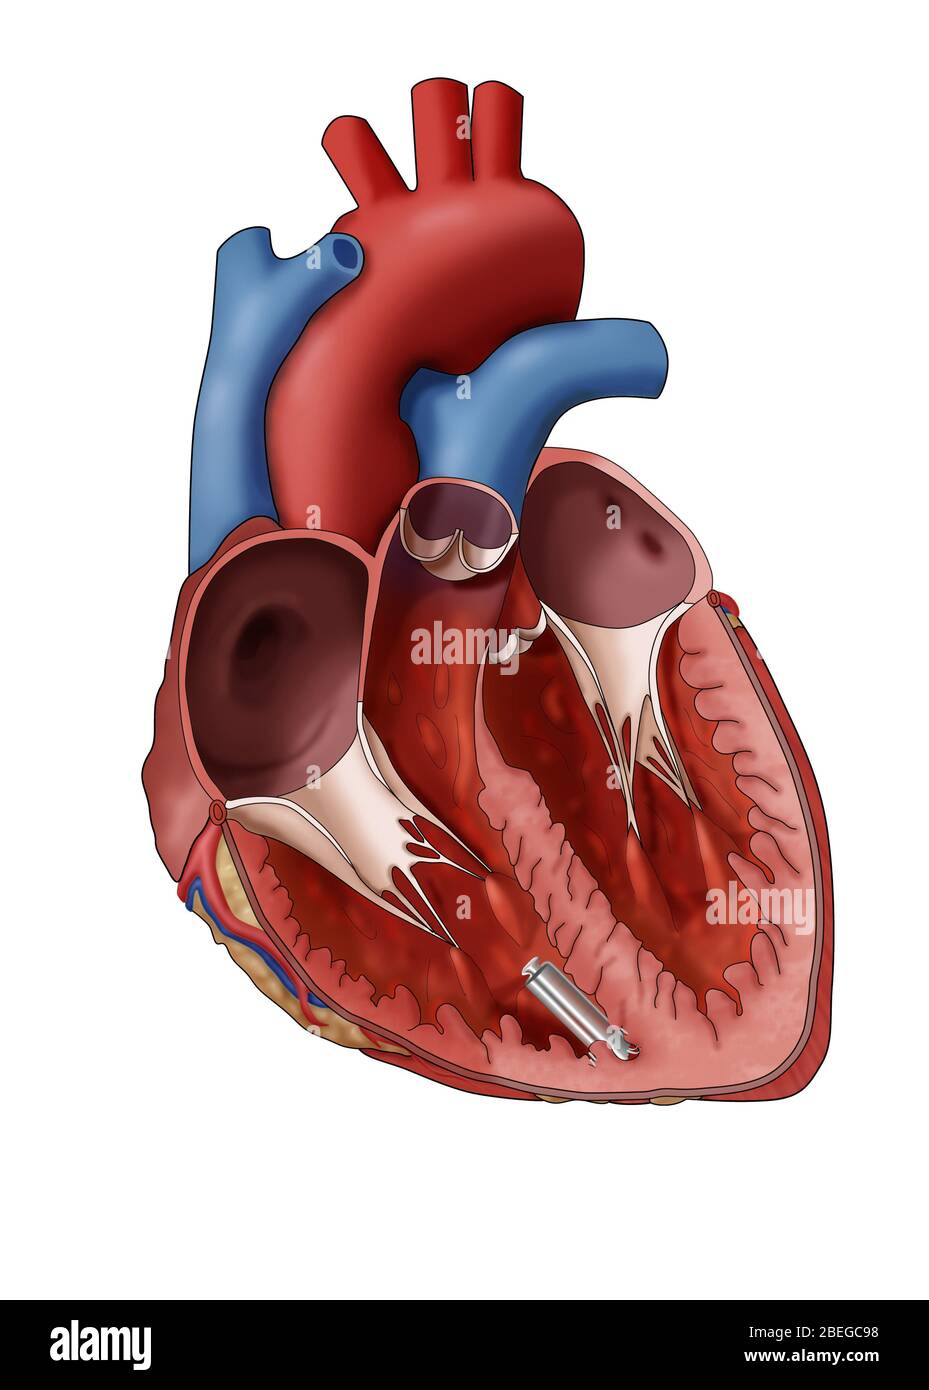 Leadless Pacemaker, Illustration Stock Photo